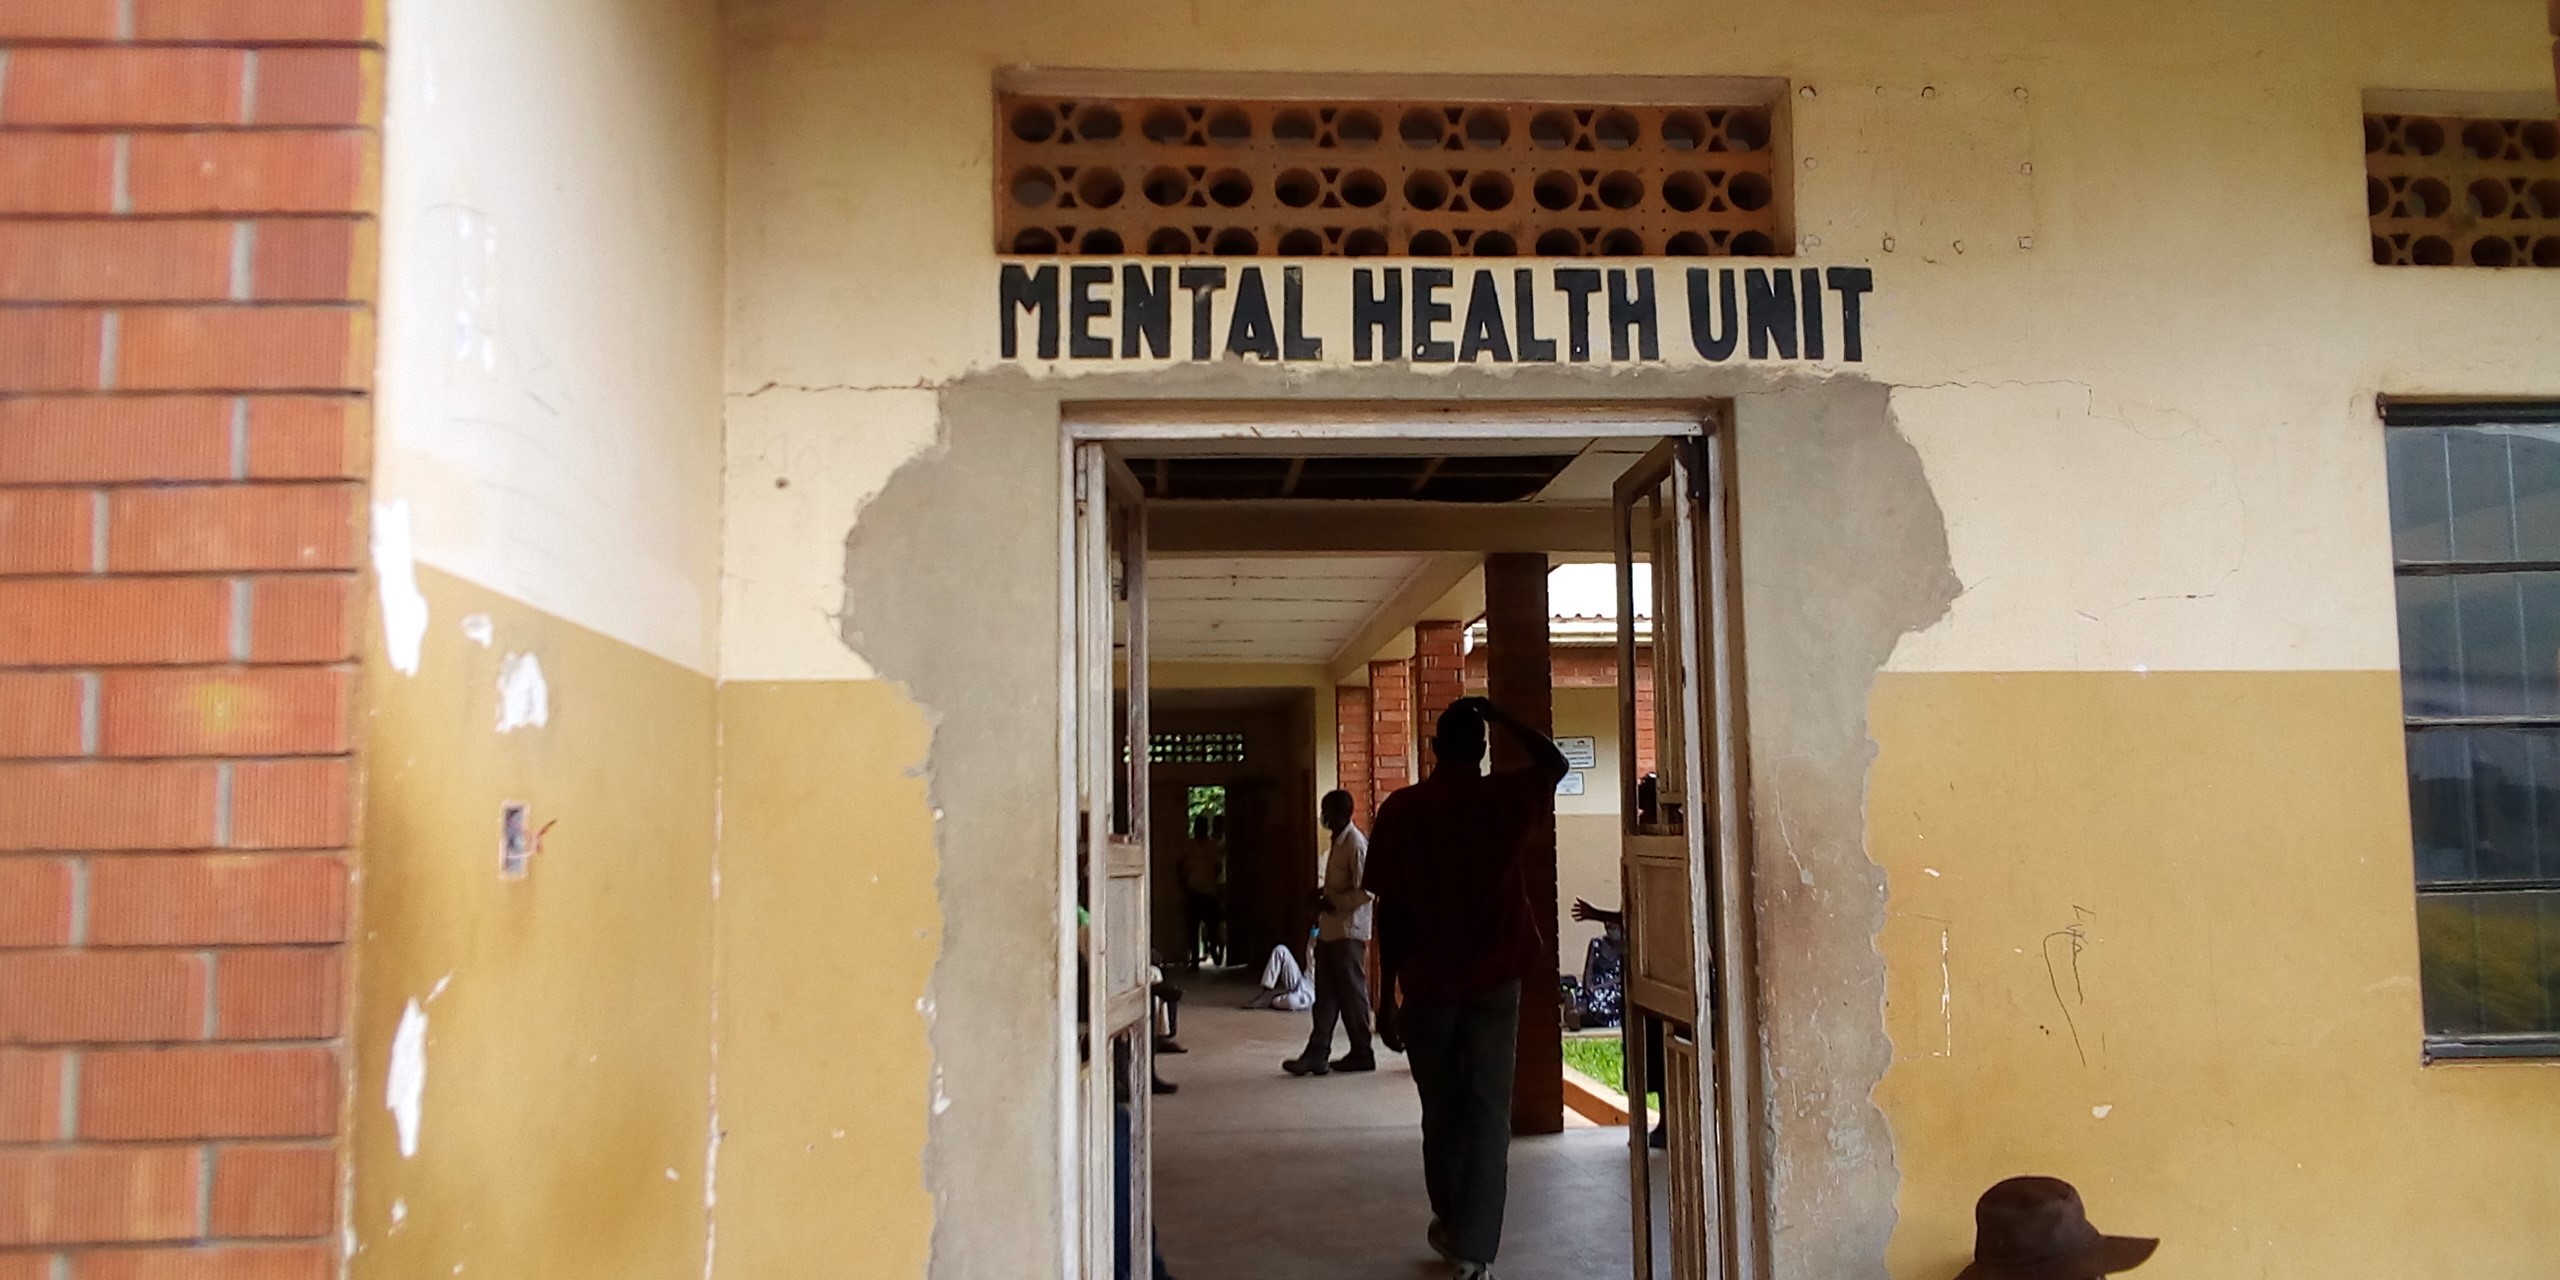 Gulu Metal health unit receives between 300-500 persons seeking help for mental illnesses monthly, according to psychiatrists at